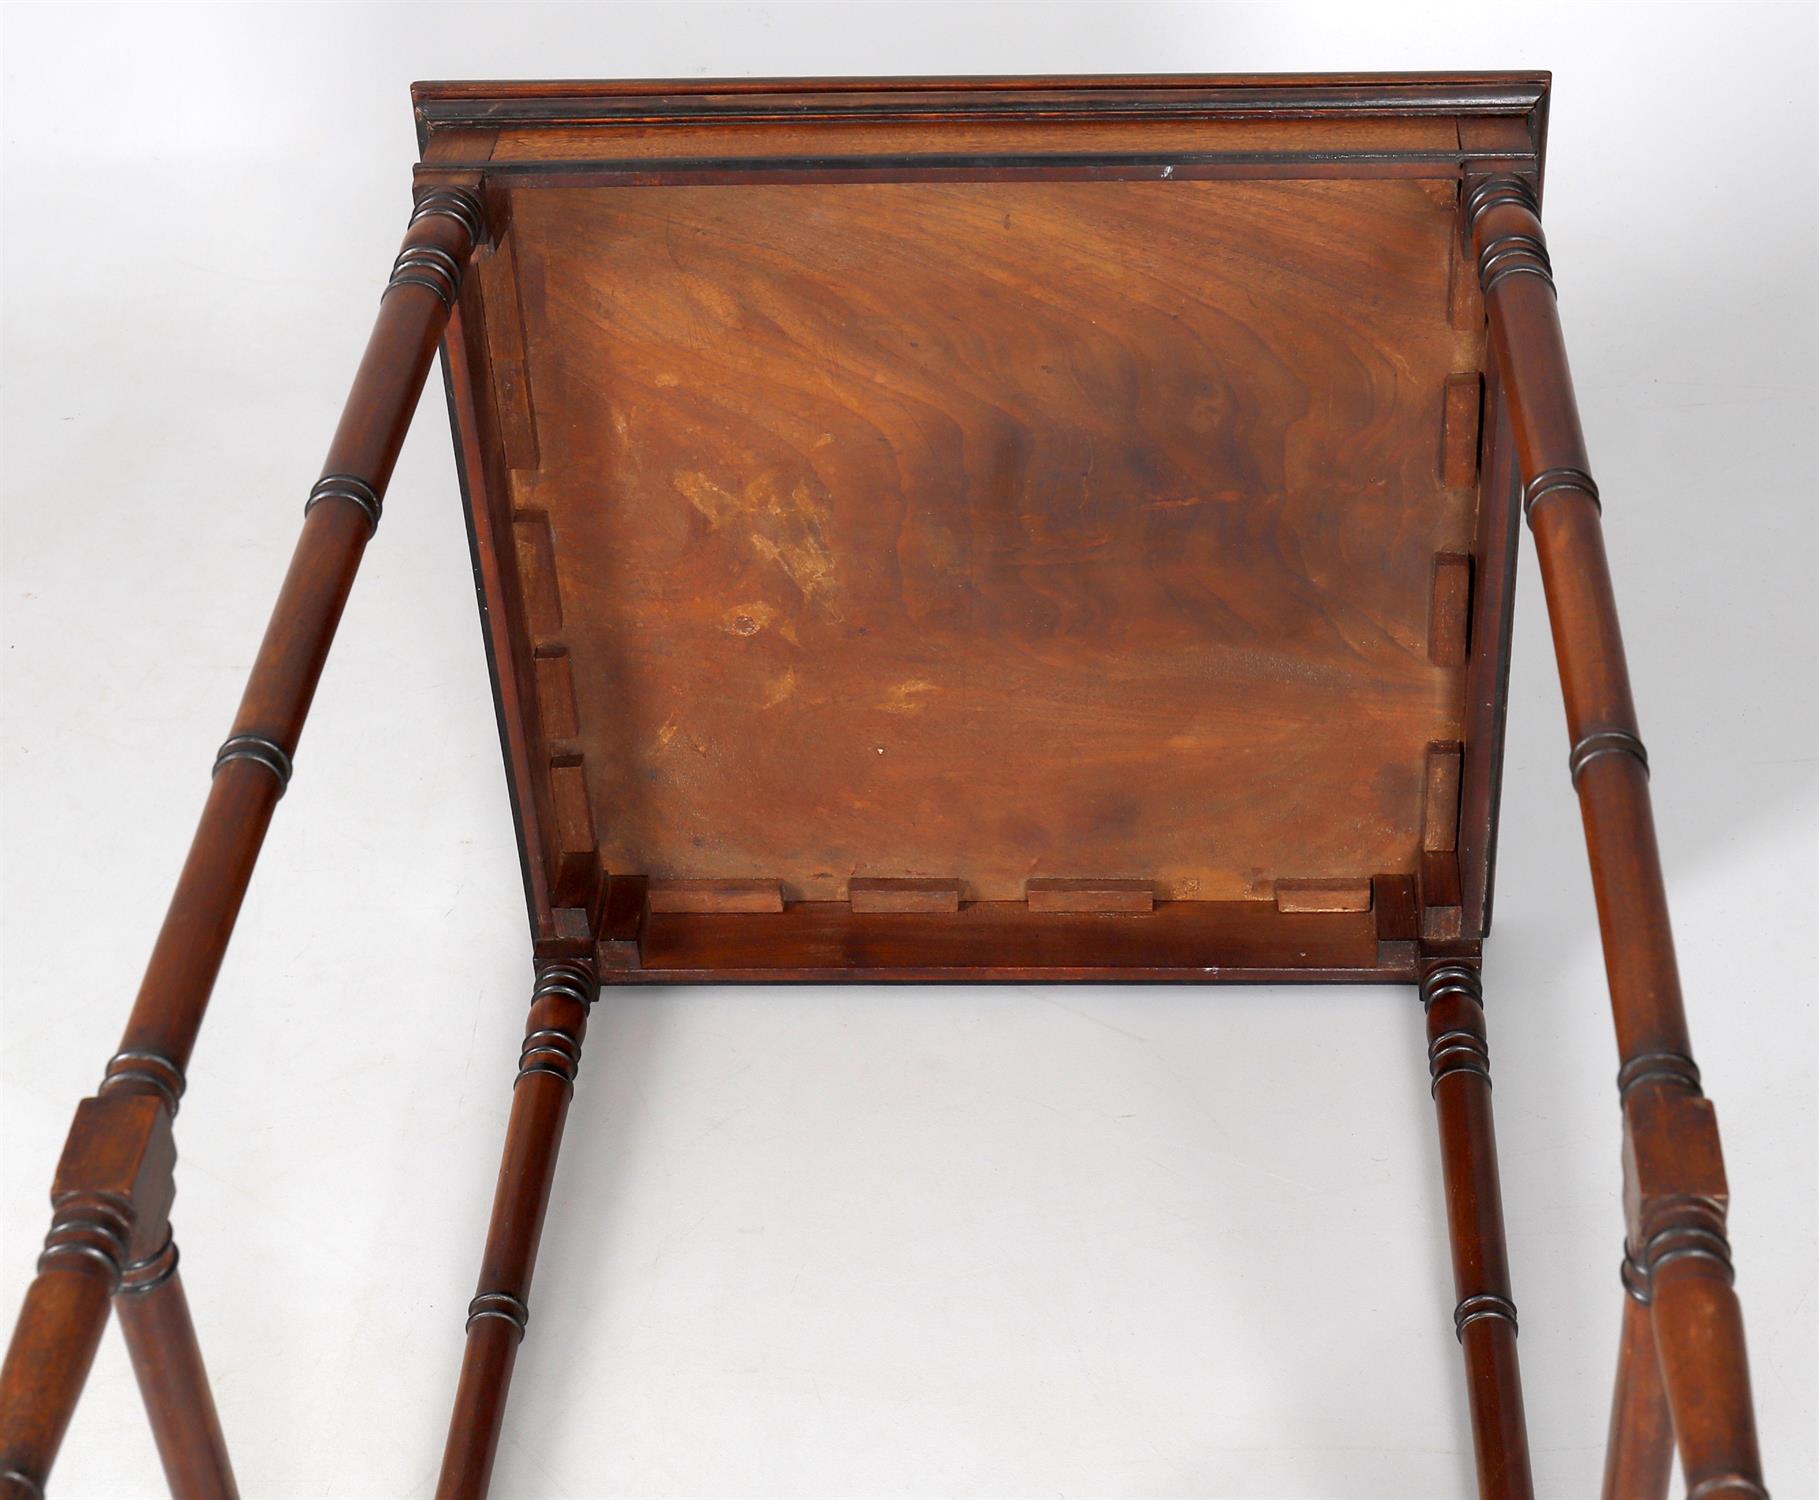 A George III mahogany and ebonised urn table in the manner of Alexander Peter - Image 6 of 6